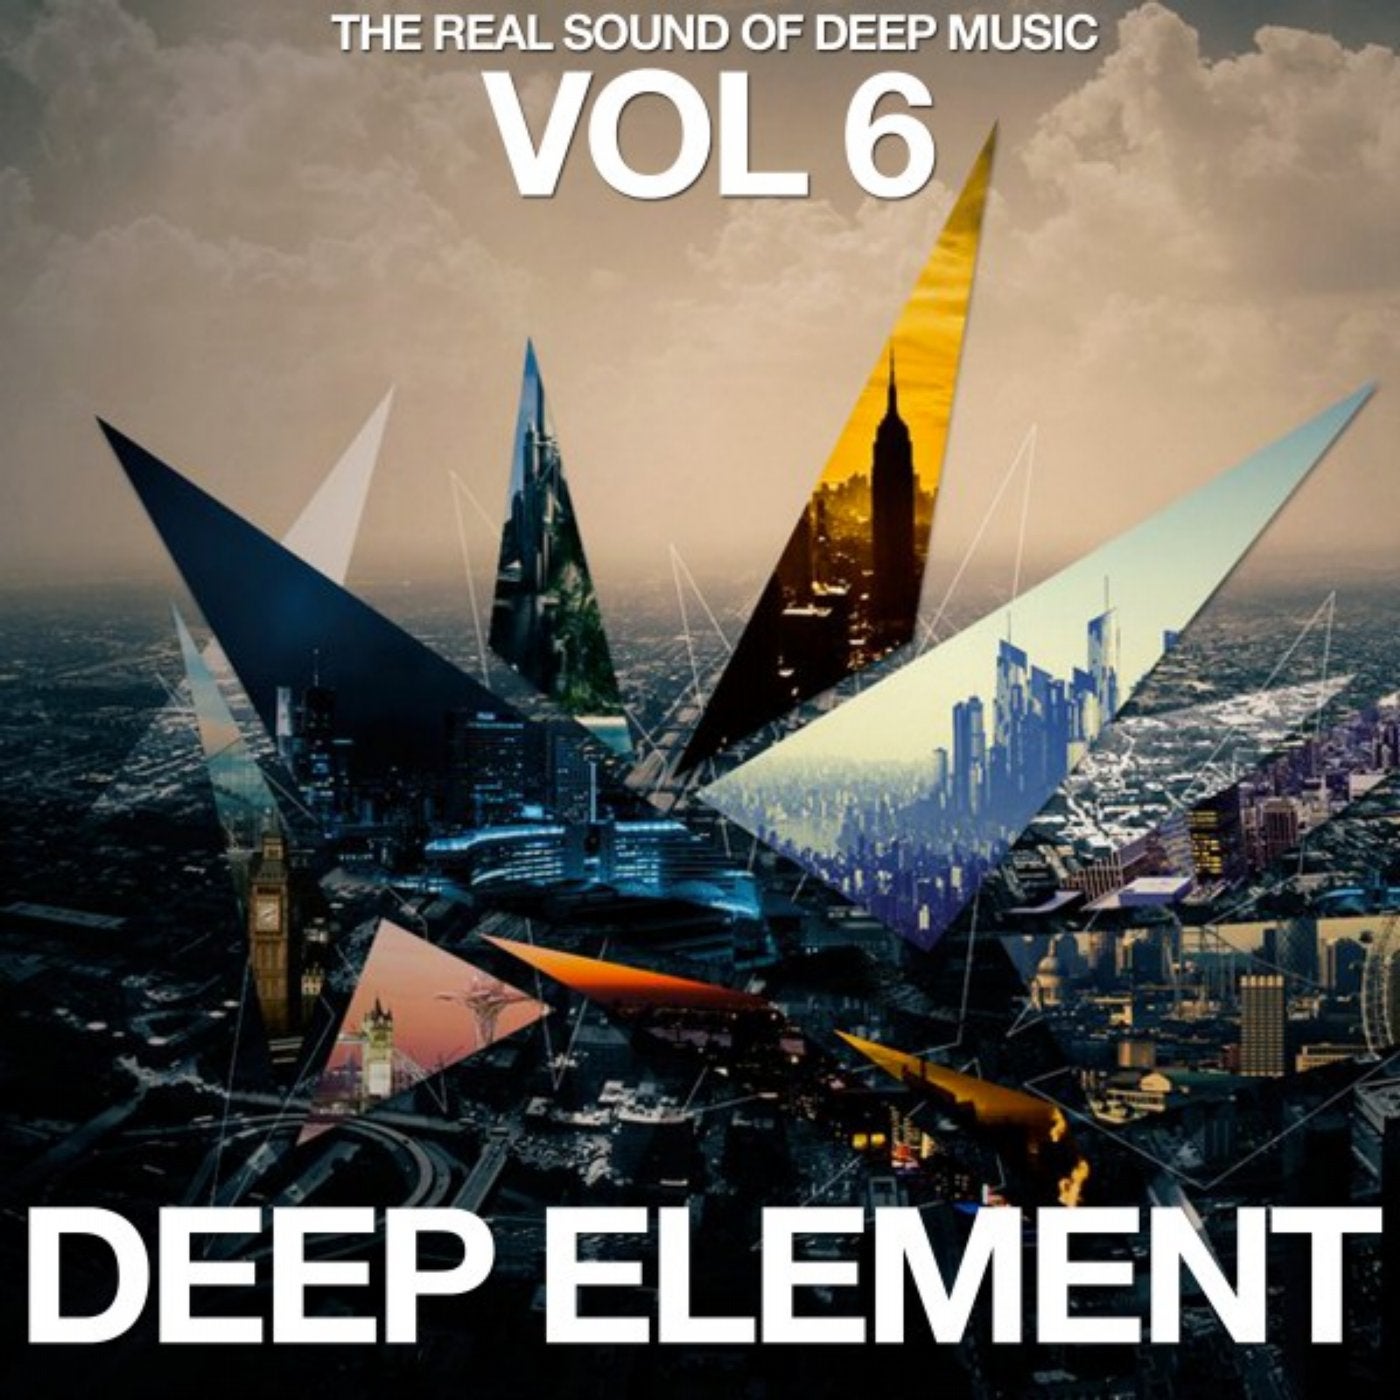 Deep Element, Vol. 6 (The Real Sound of Deep Music)